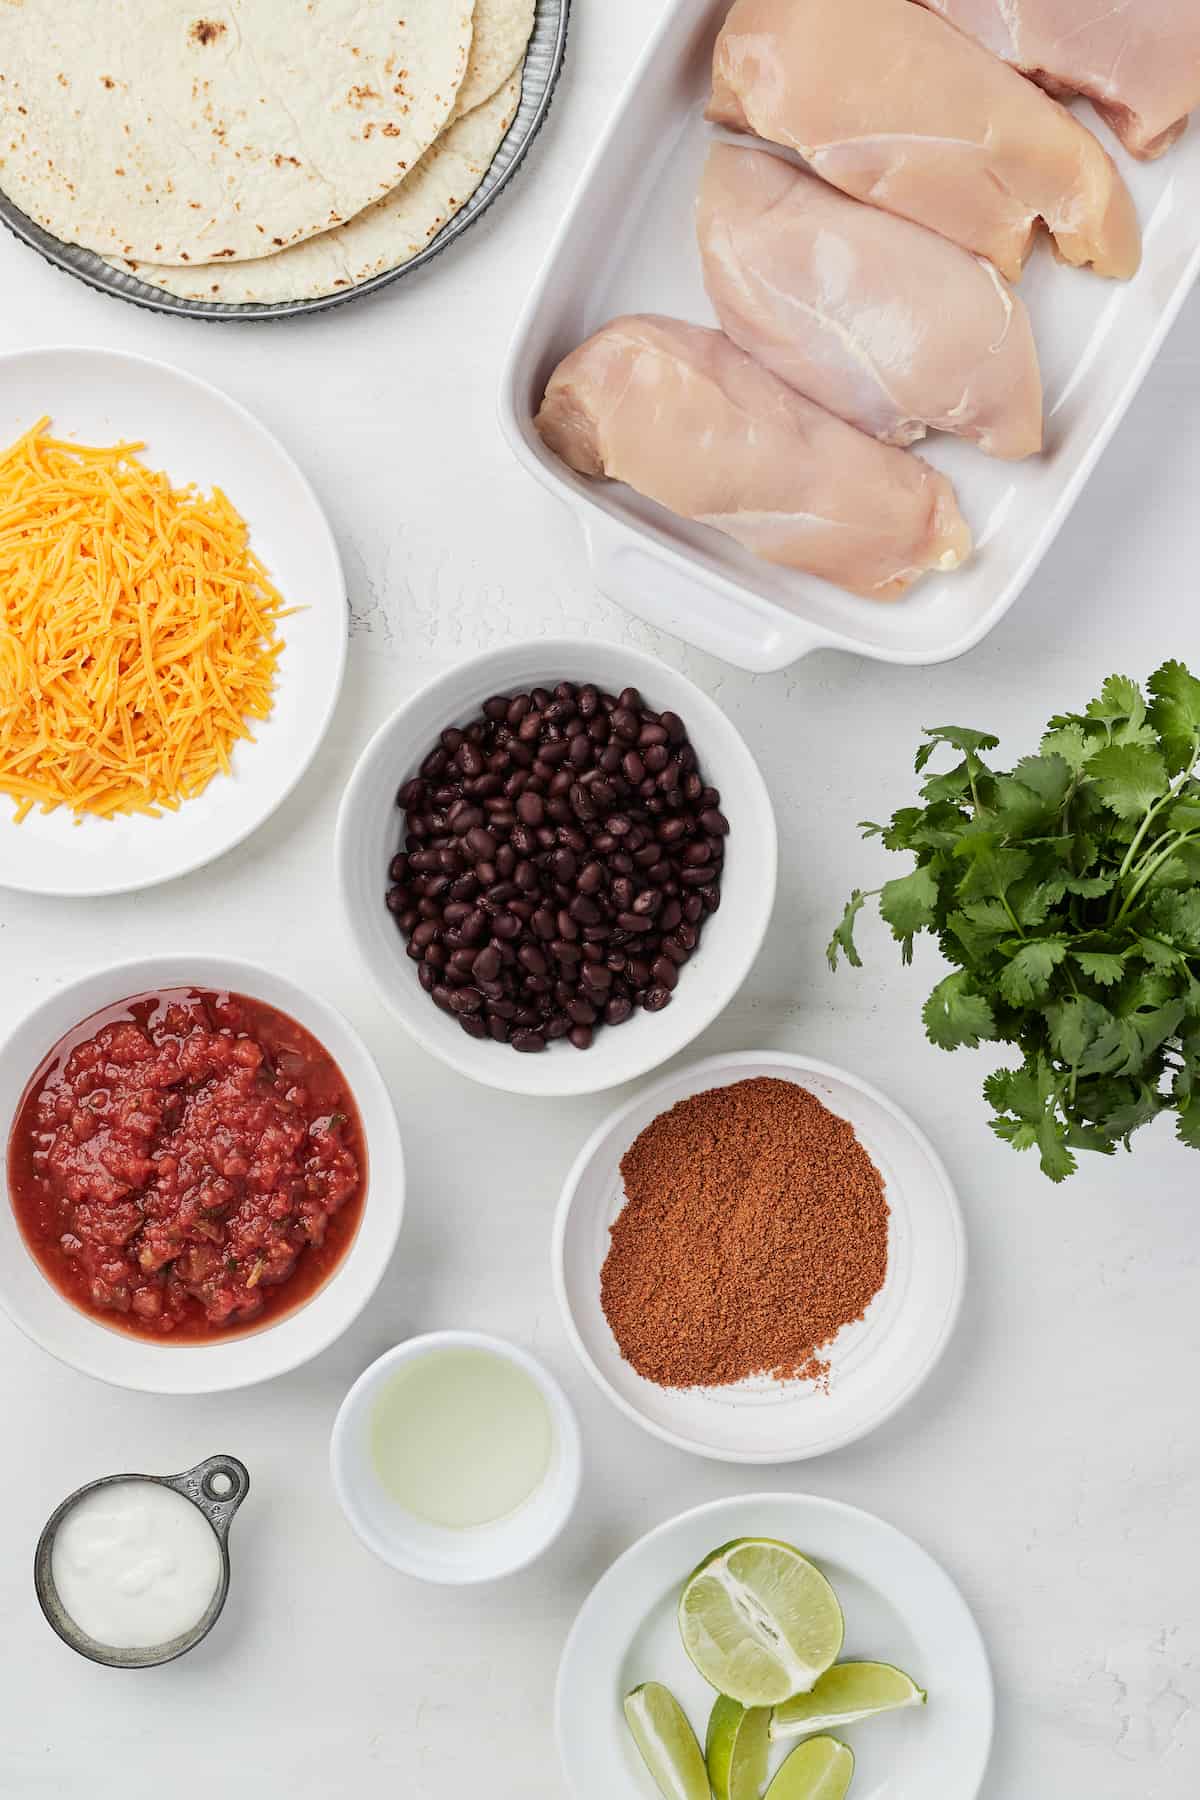 Raw chicken breasts, black beans, salsa and the rest of the ingredients arranged neatly on a countertop.